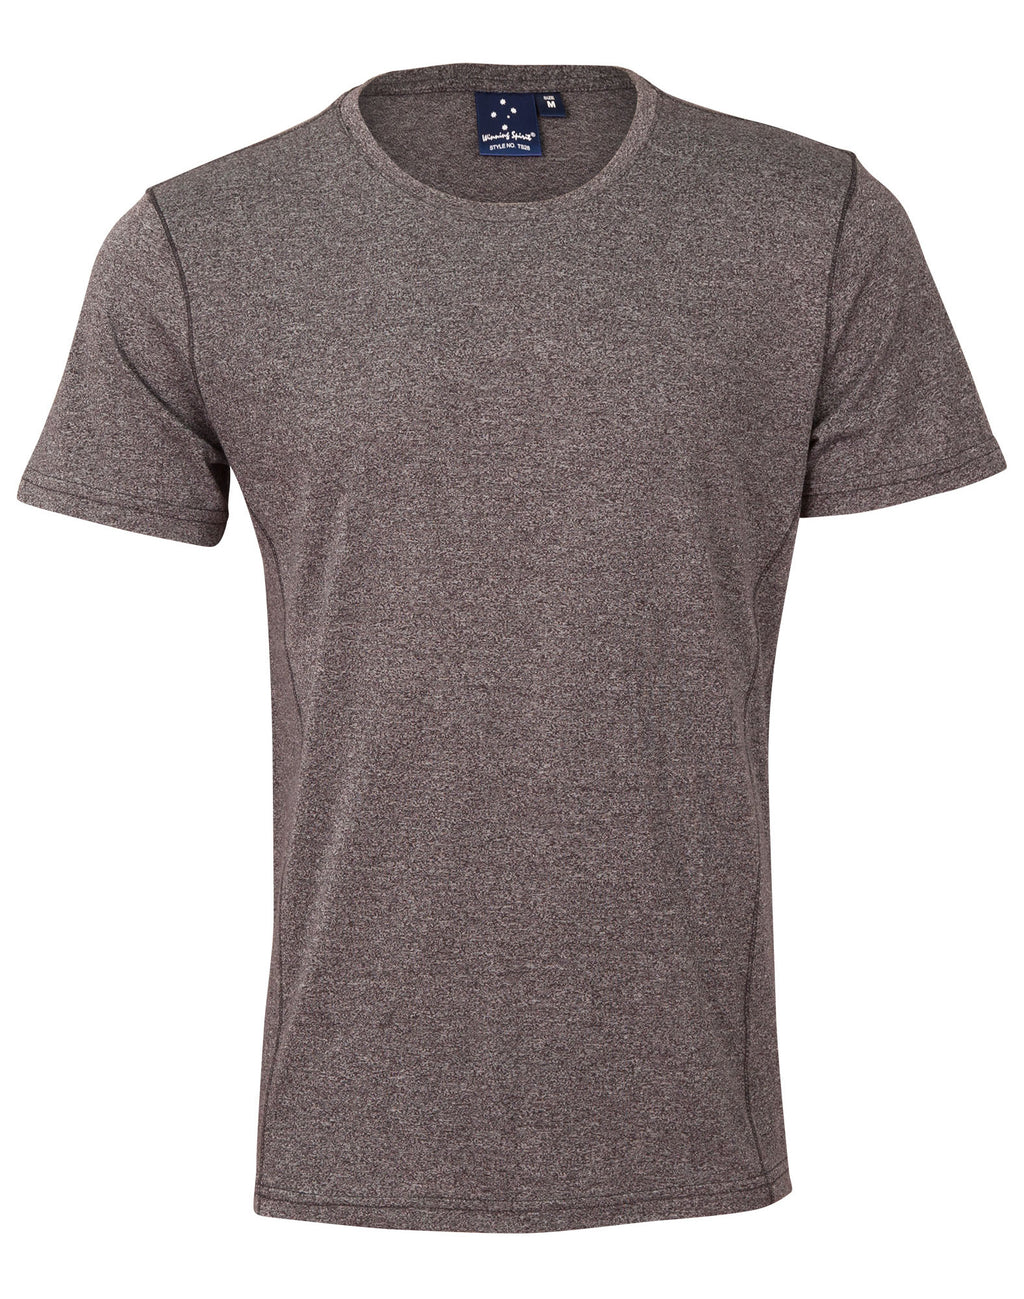 JCTS27 HEATHER TEE MENS